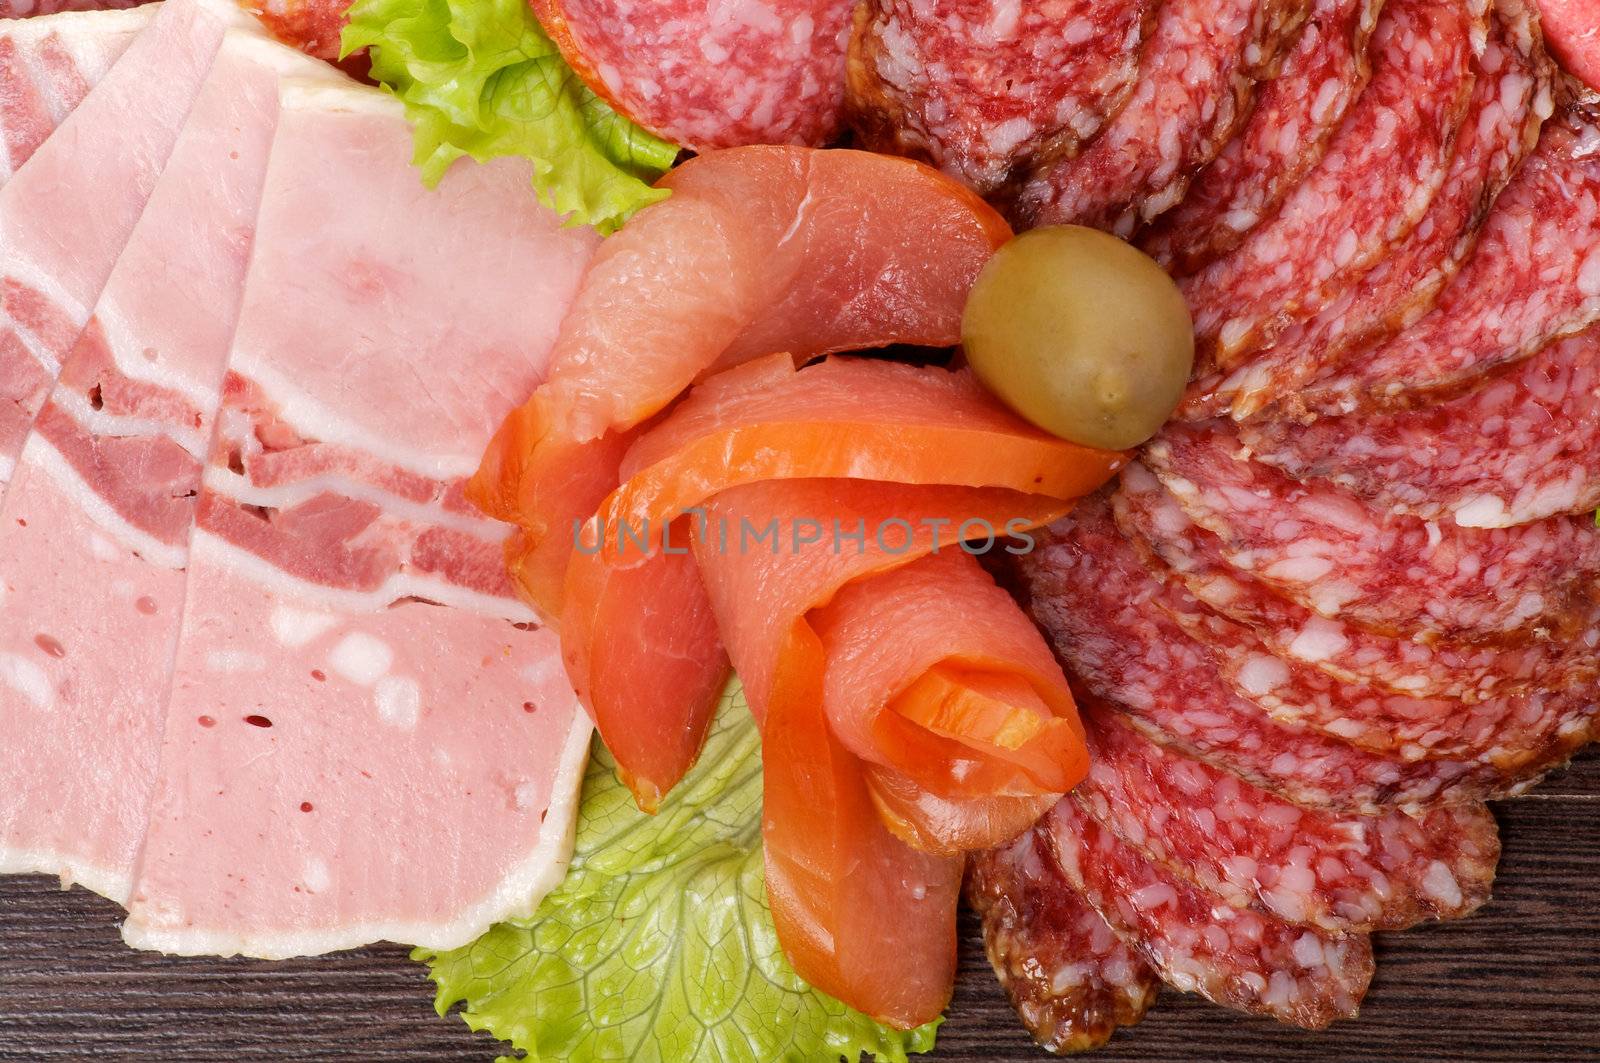 Arrangement of Cold Meats with Salami, Smoked Pork, Сarpaccio, Baloney, Sausage and Green Olives closeup